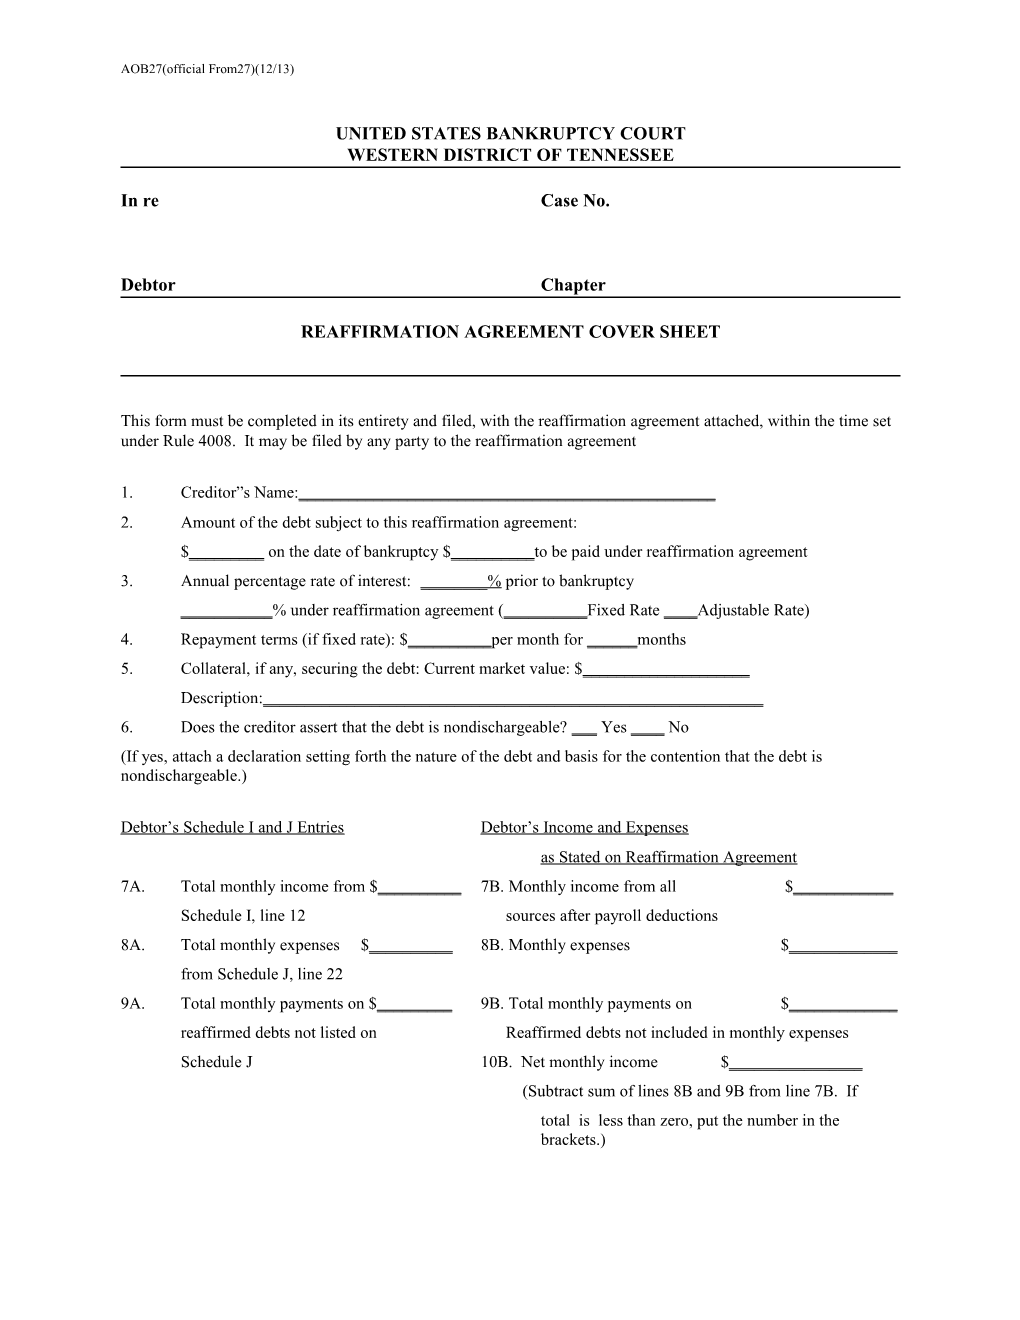 AOB27 Reaffirmation Agreement Cover Sheet